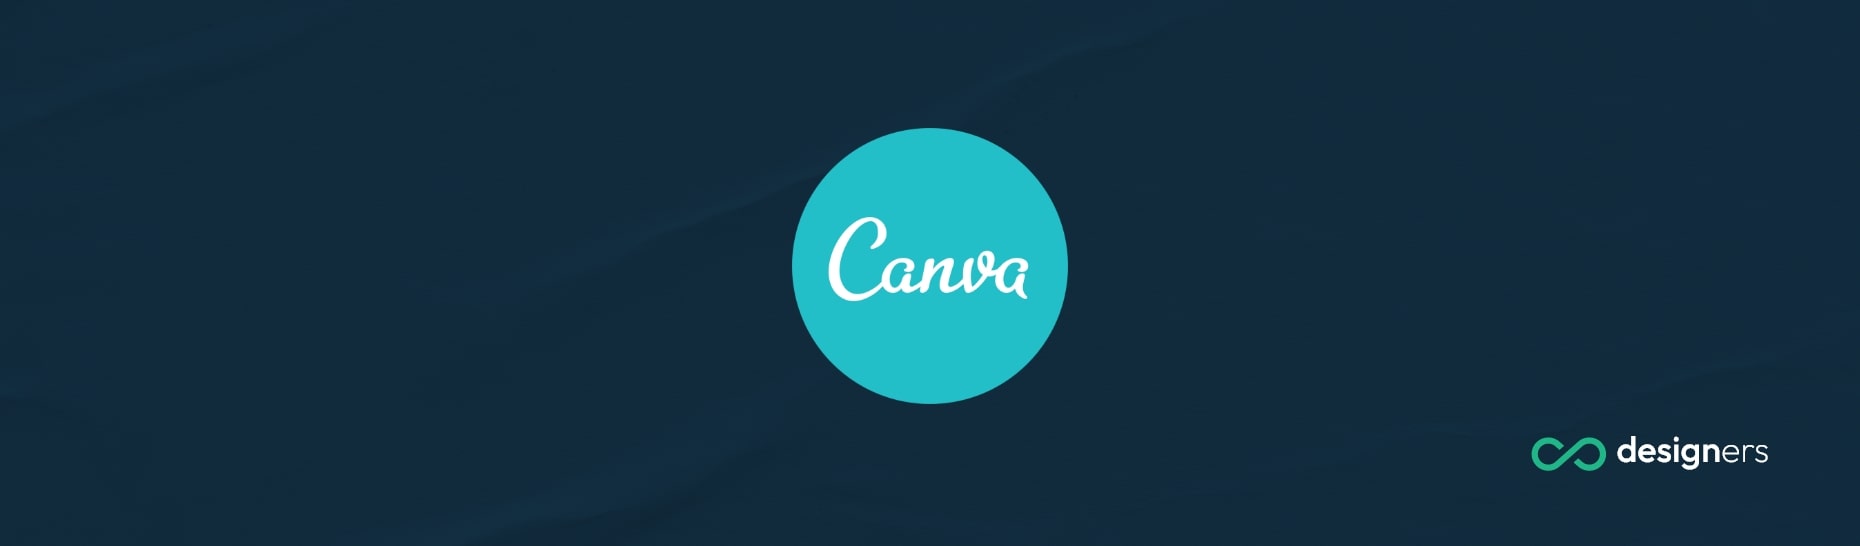 Where Is the Erase Brush on Canva?